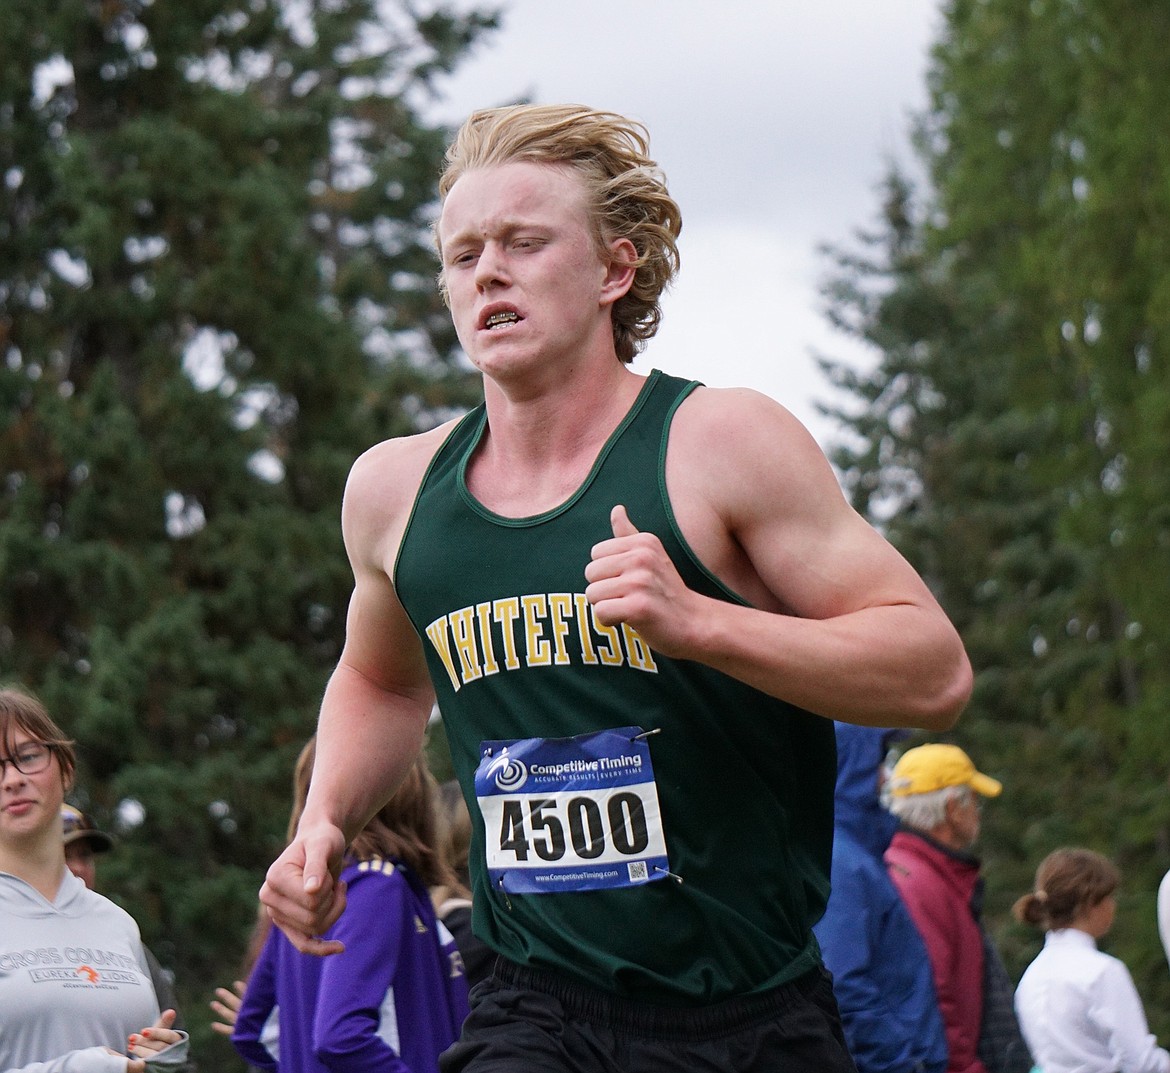 Bulldog senior Cole Cameron finishes at just under 20 minutes (19:56) at the Whitefish cross country invitational. (Matt Weller photo)